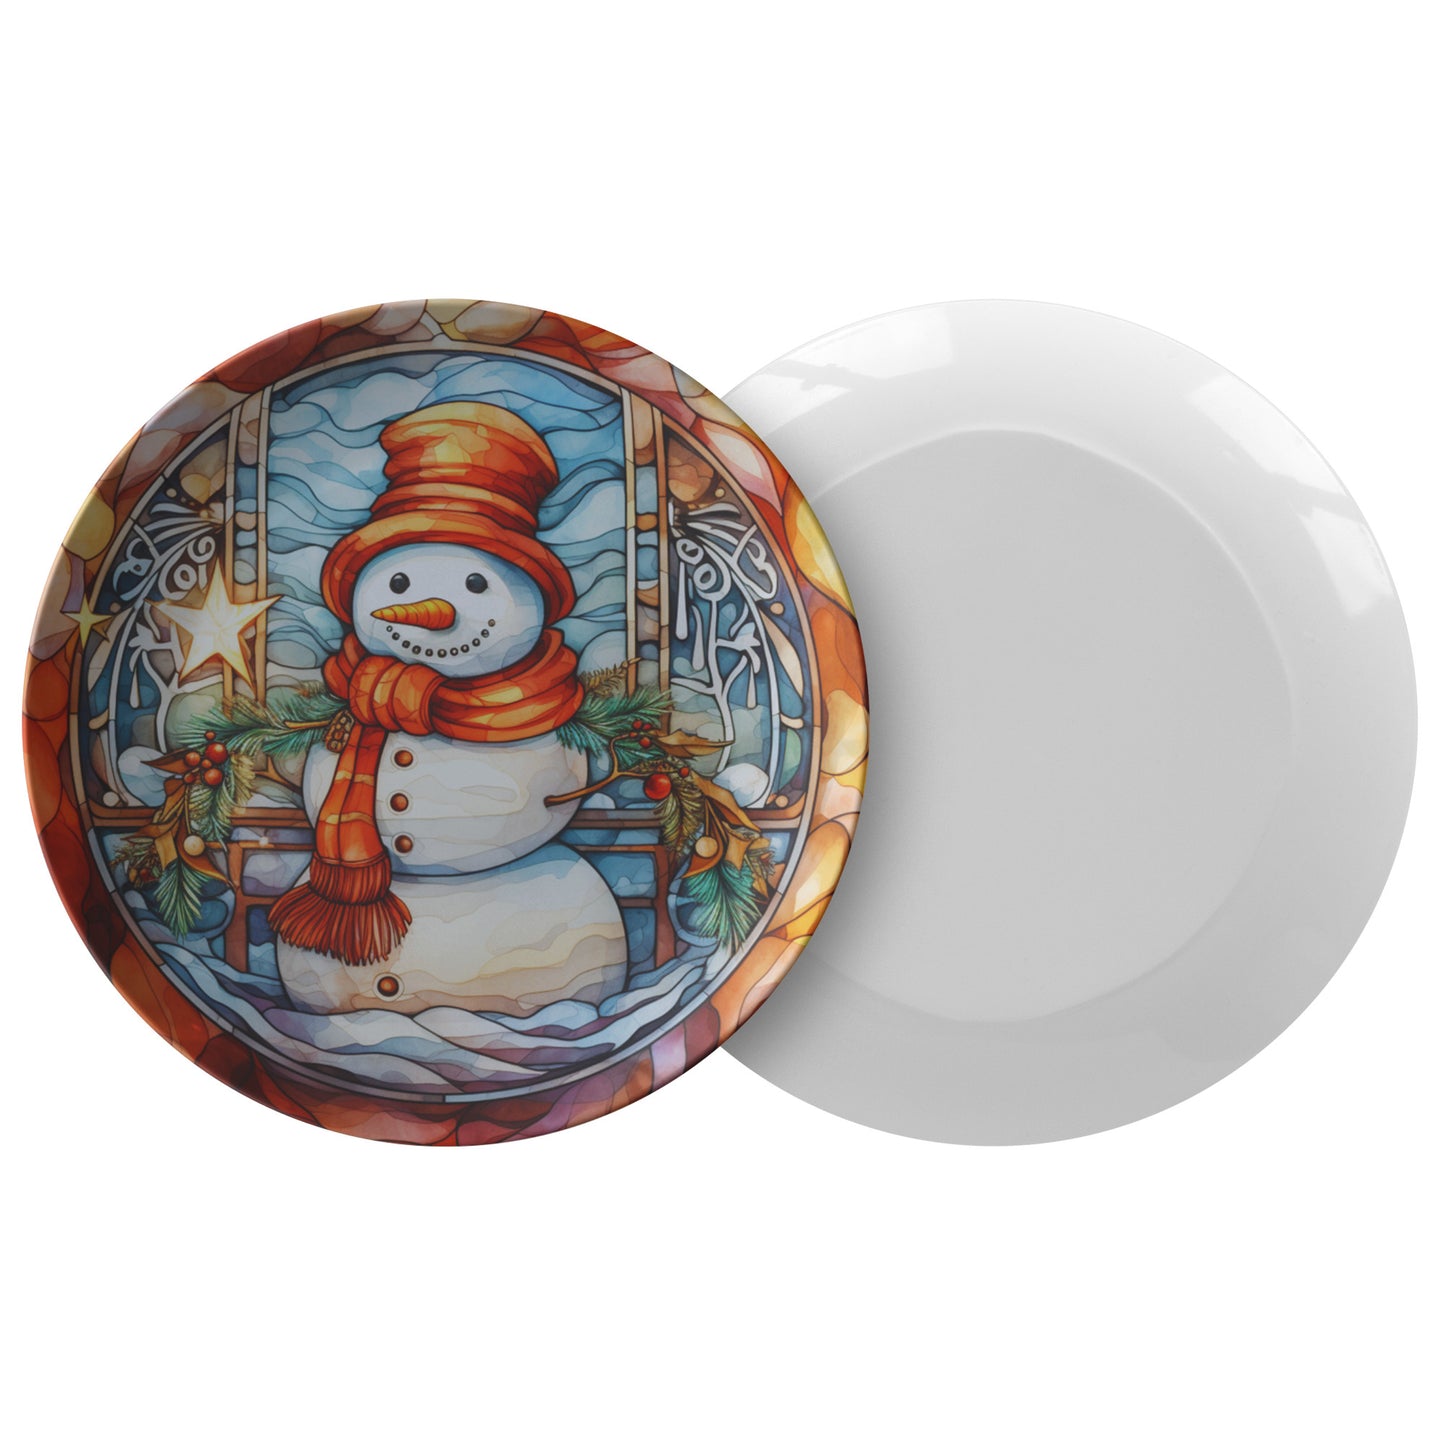 Thermosaf Polymer Plastic Snowman Christmas Dinner Plate